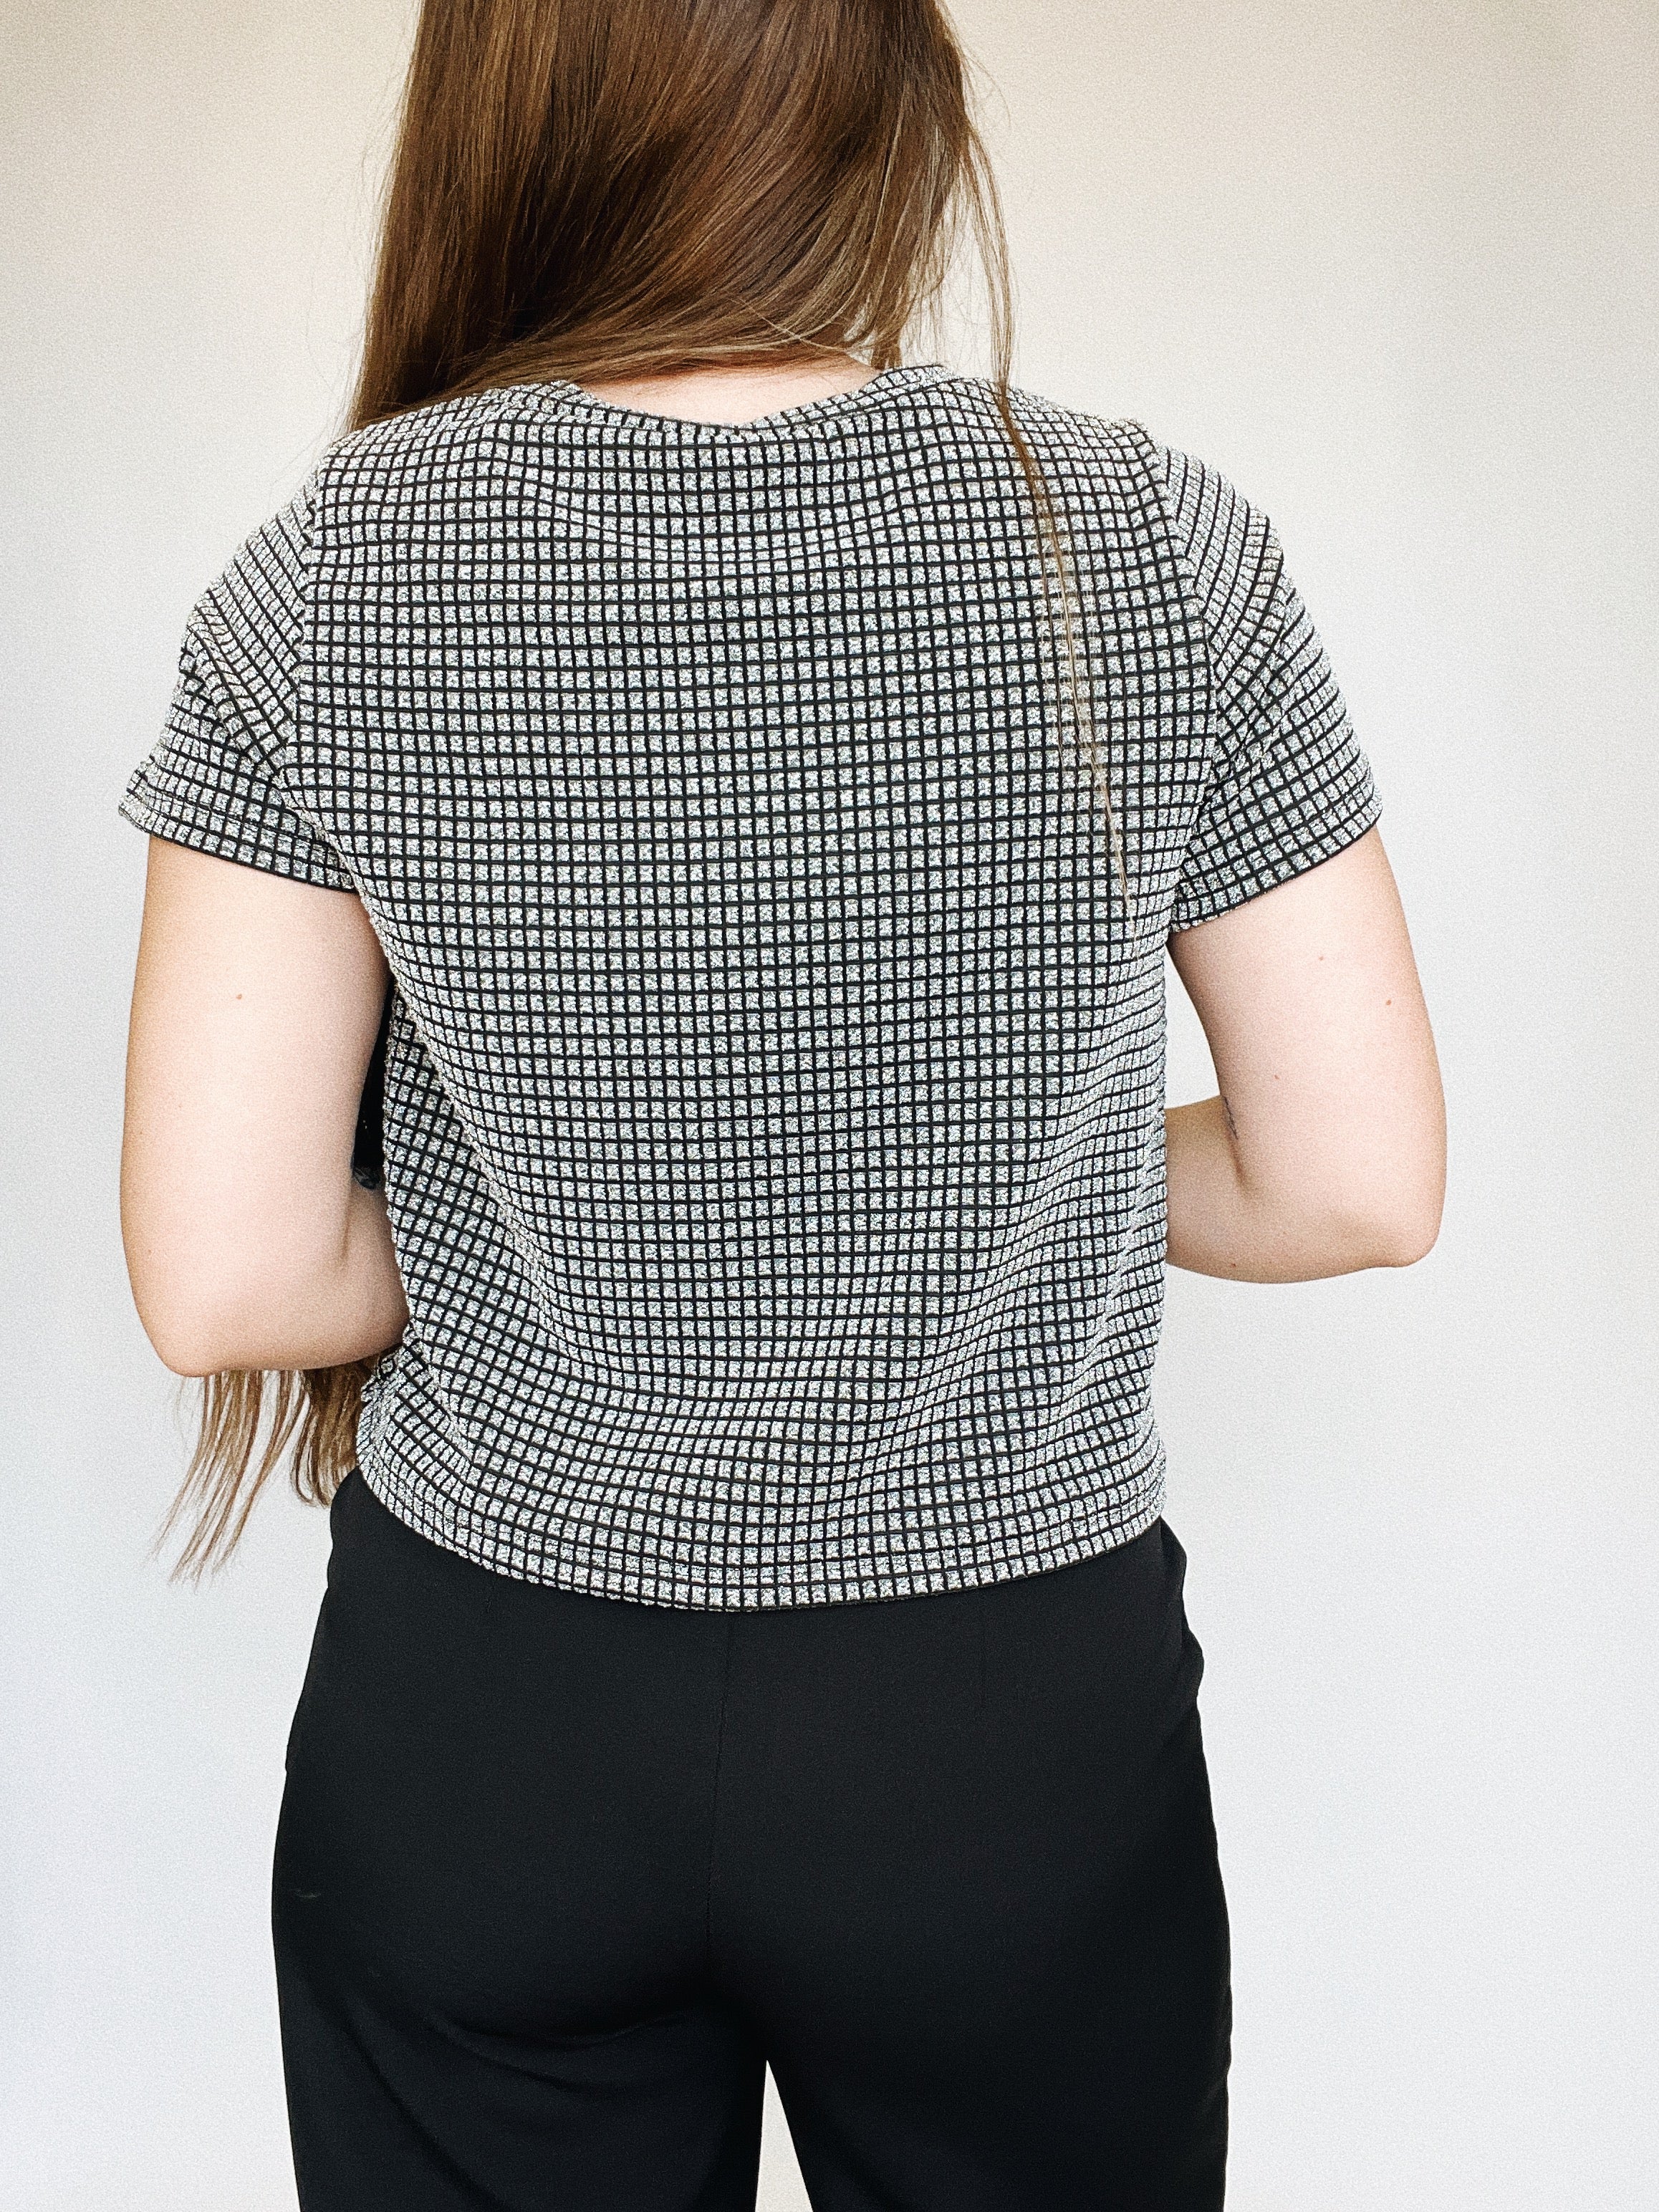 grid twinkle top – Kindred People